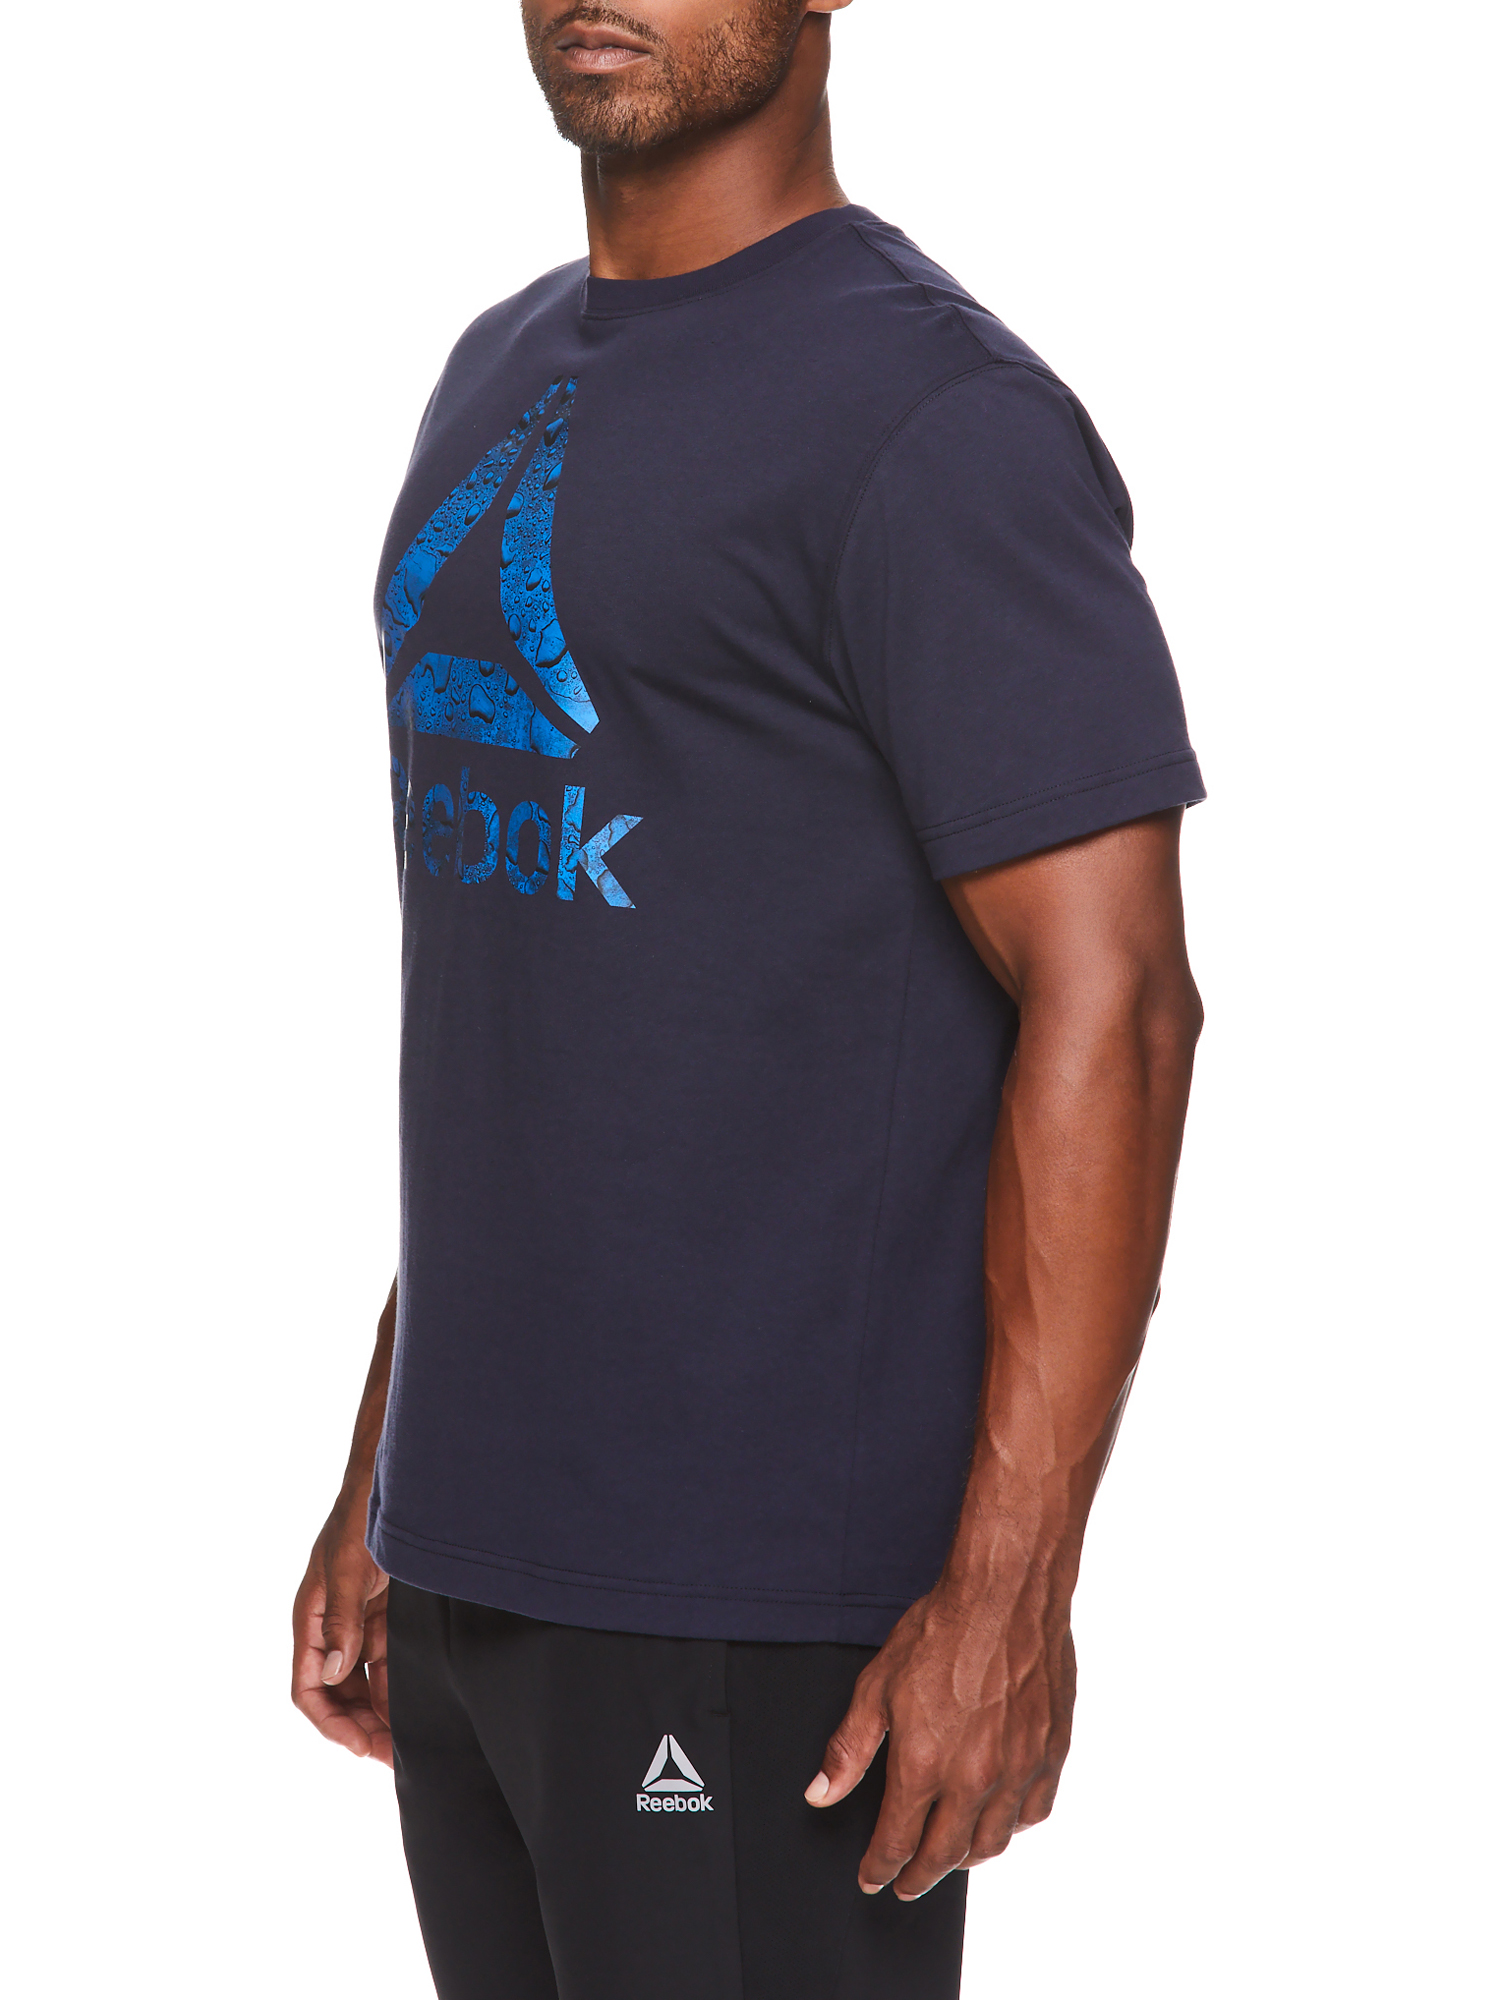 Reebok Men's and Big Men's Active Hiit Graphic Training Tee, up to Size 3XL - image 4 of 4